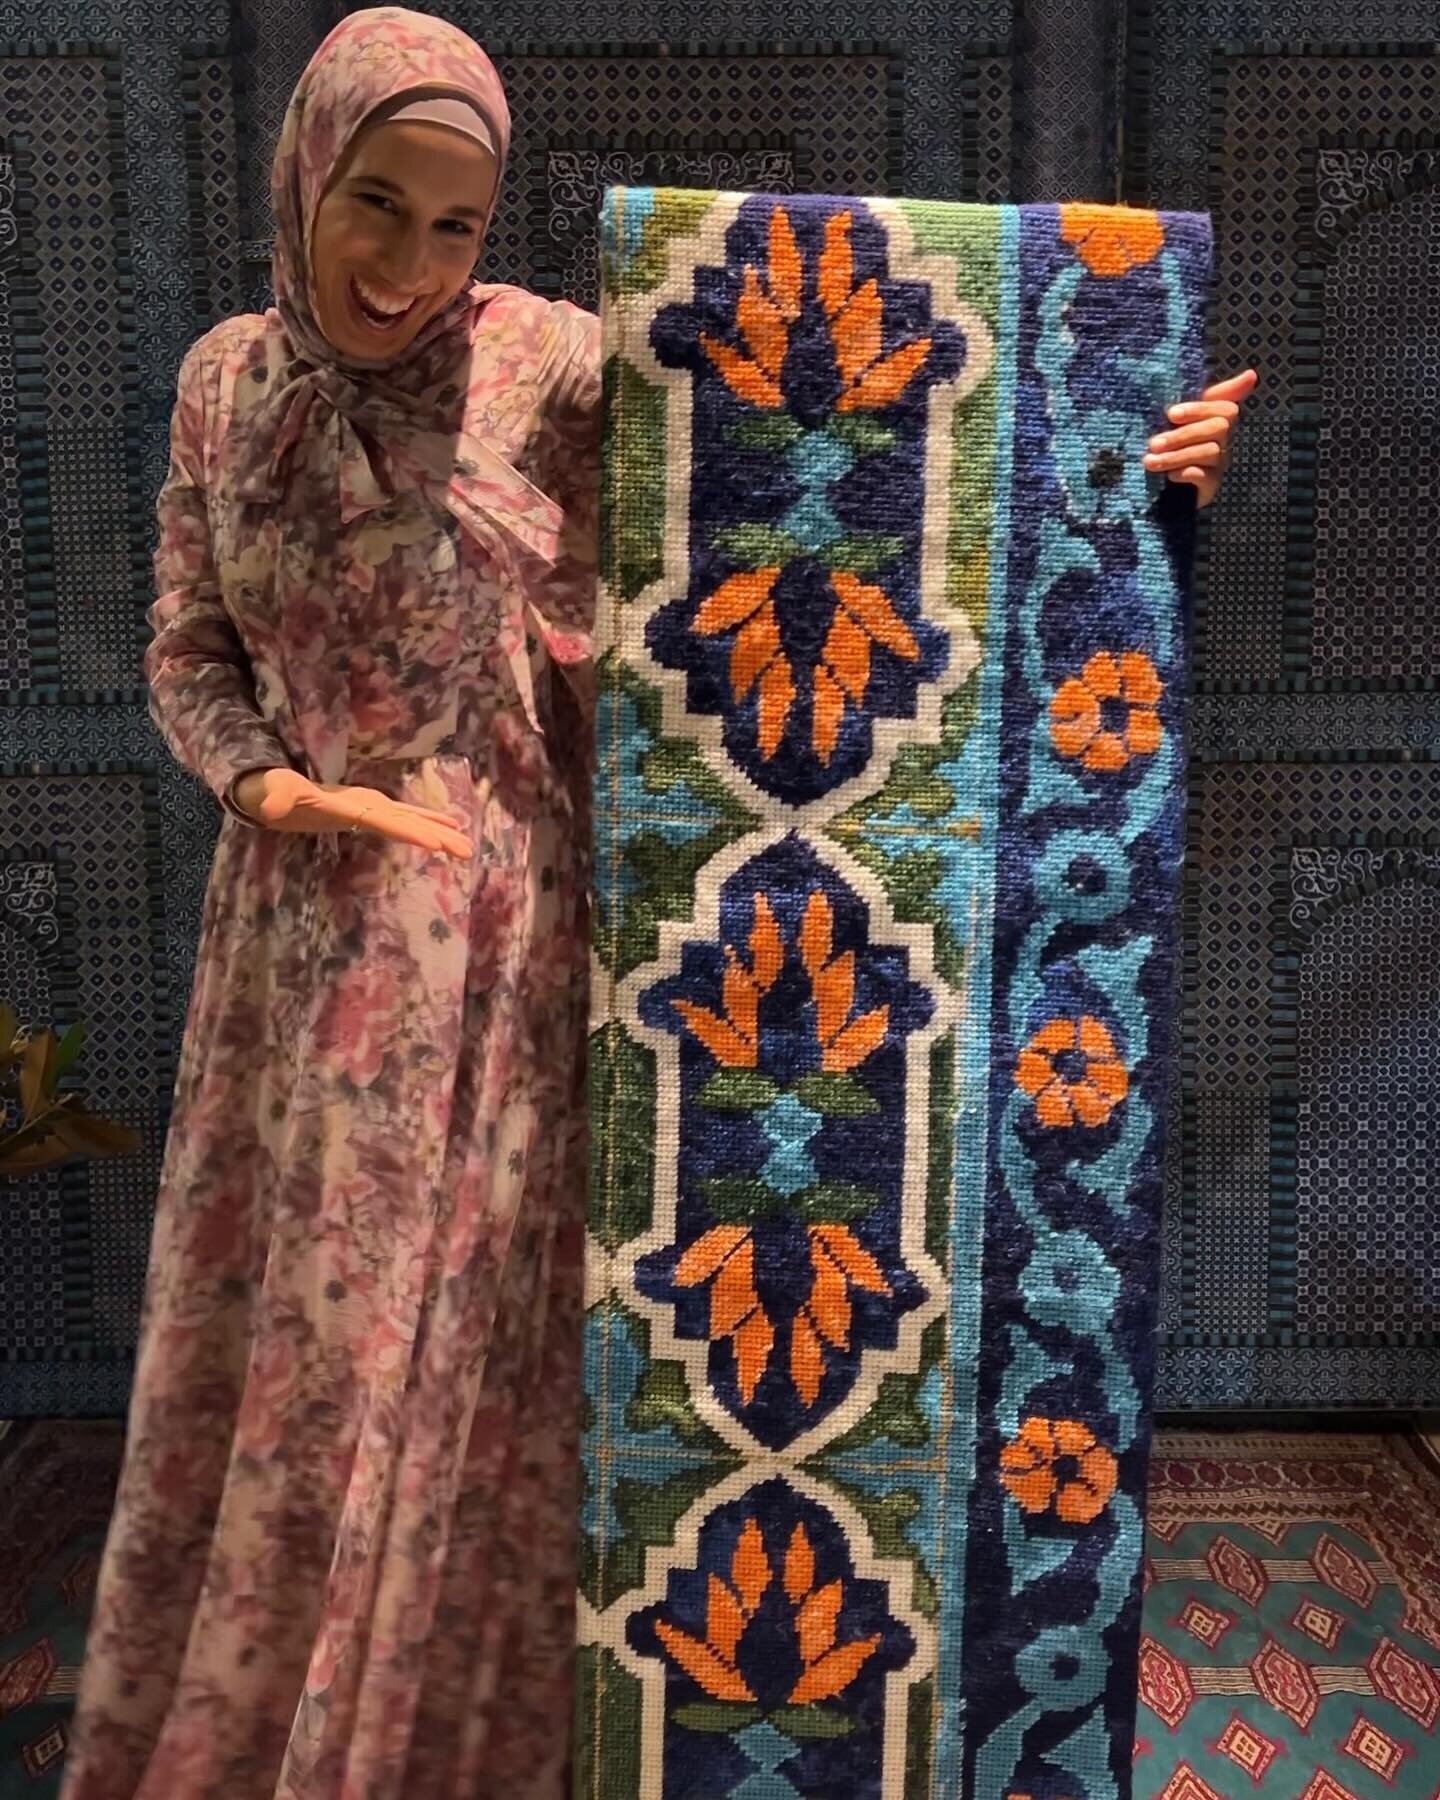 Meet Amar! Amar is the new owner of my needlepoint, as winning bidder of this auction item at the @australiaforunhcr 2024 Iftar charity dinner. This year&rsquo;s dinner was held to raise money to build water wells in Afghanistan. I donated a needlepo